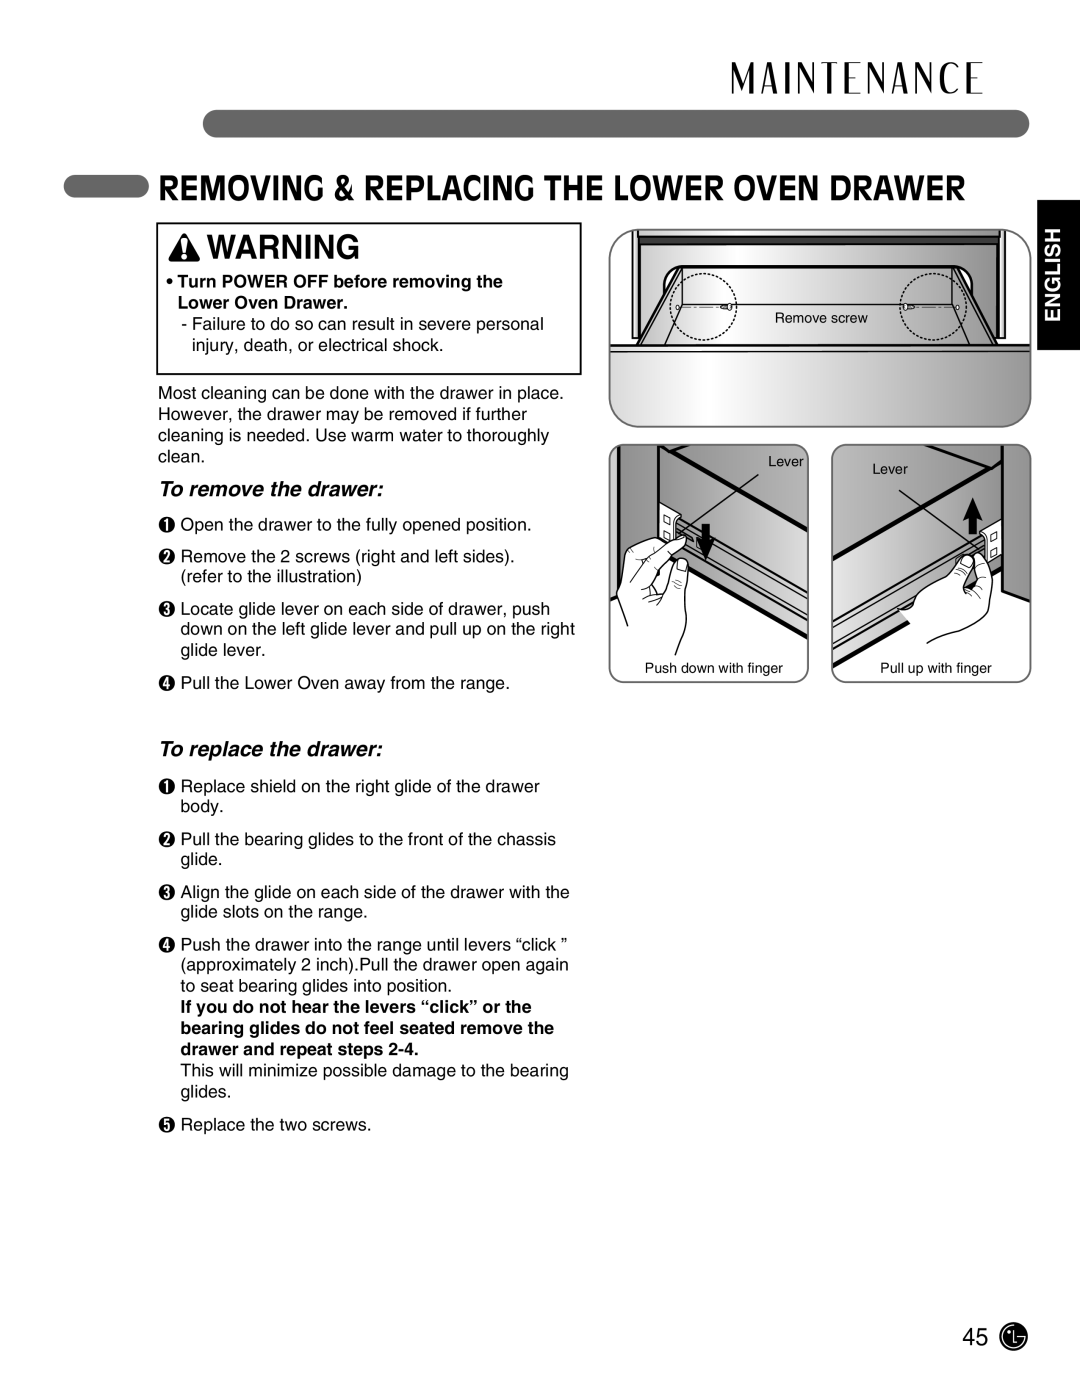 LG Electronics LSE3092ST manual M A I N T E N A N C E, Removing & Replacing The Lower Oven Drawer, To remove the drawer 